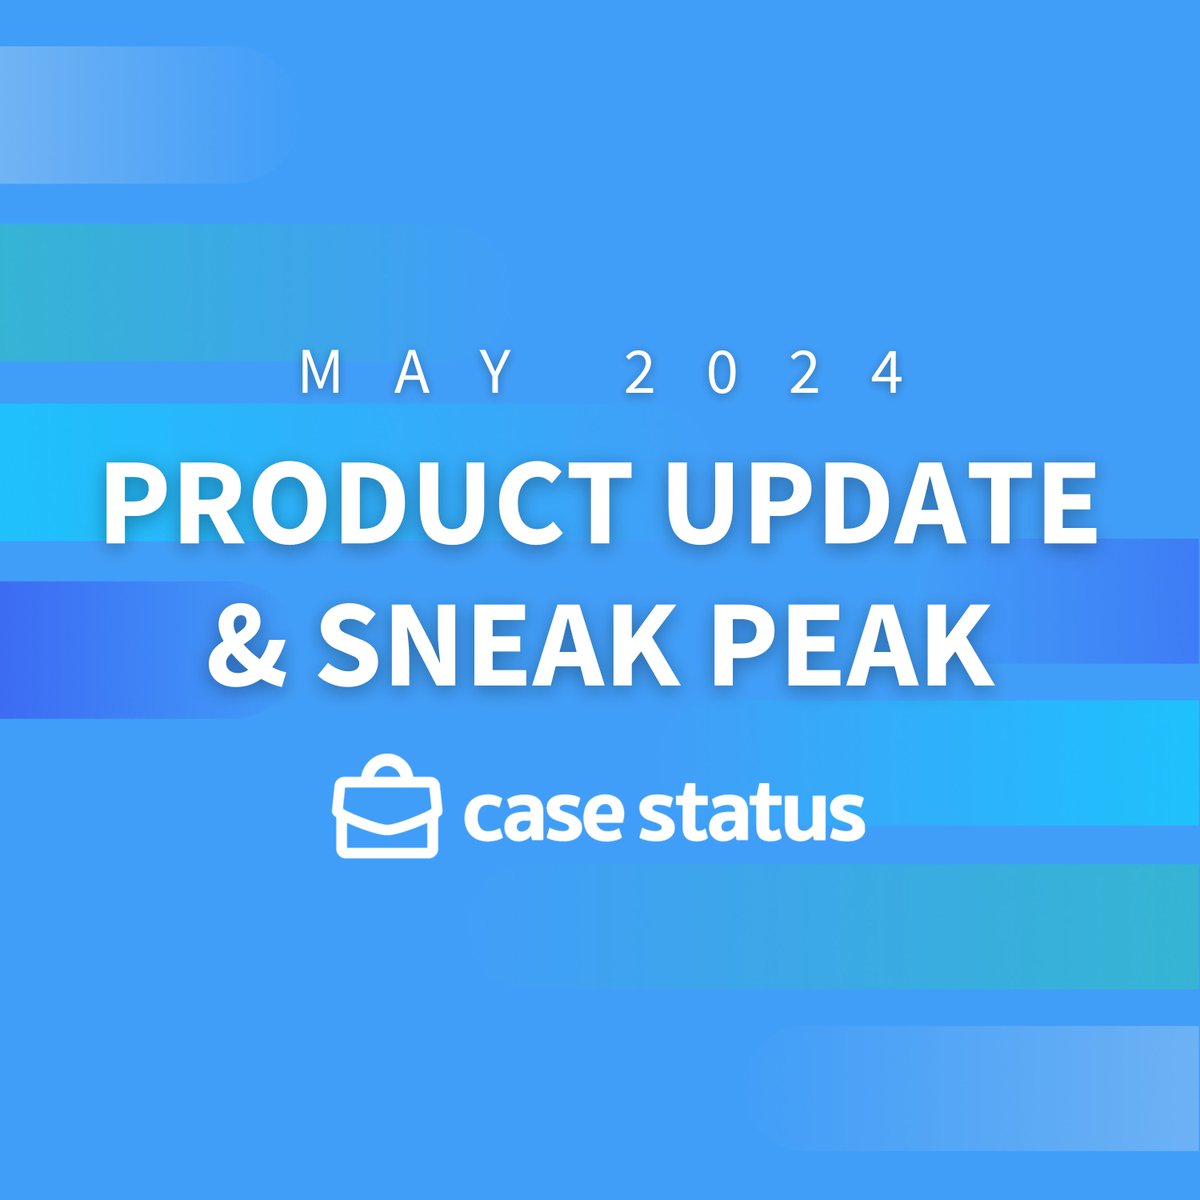 Join us today for our quarterly legal client engagement webinar + get the full scoop on everything we are working on this month! 💼

hubs.ly/Q02x6ZsD0

#CaseStatus #LegalTech #productupdate #may2024 #legaltechnology